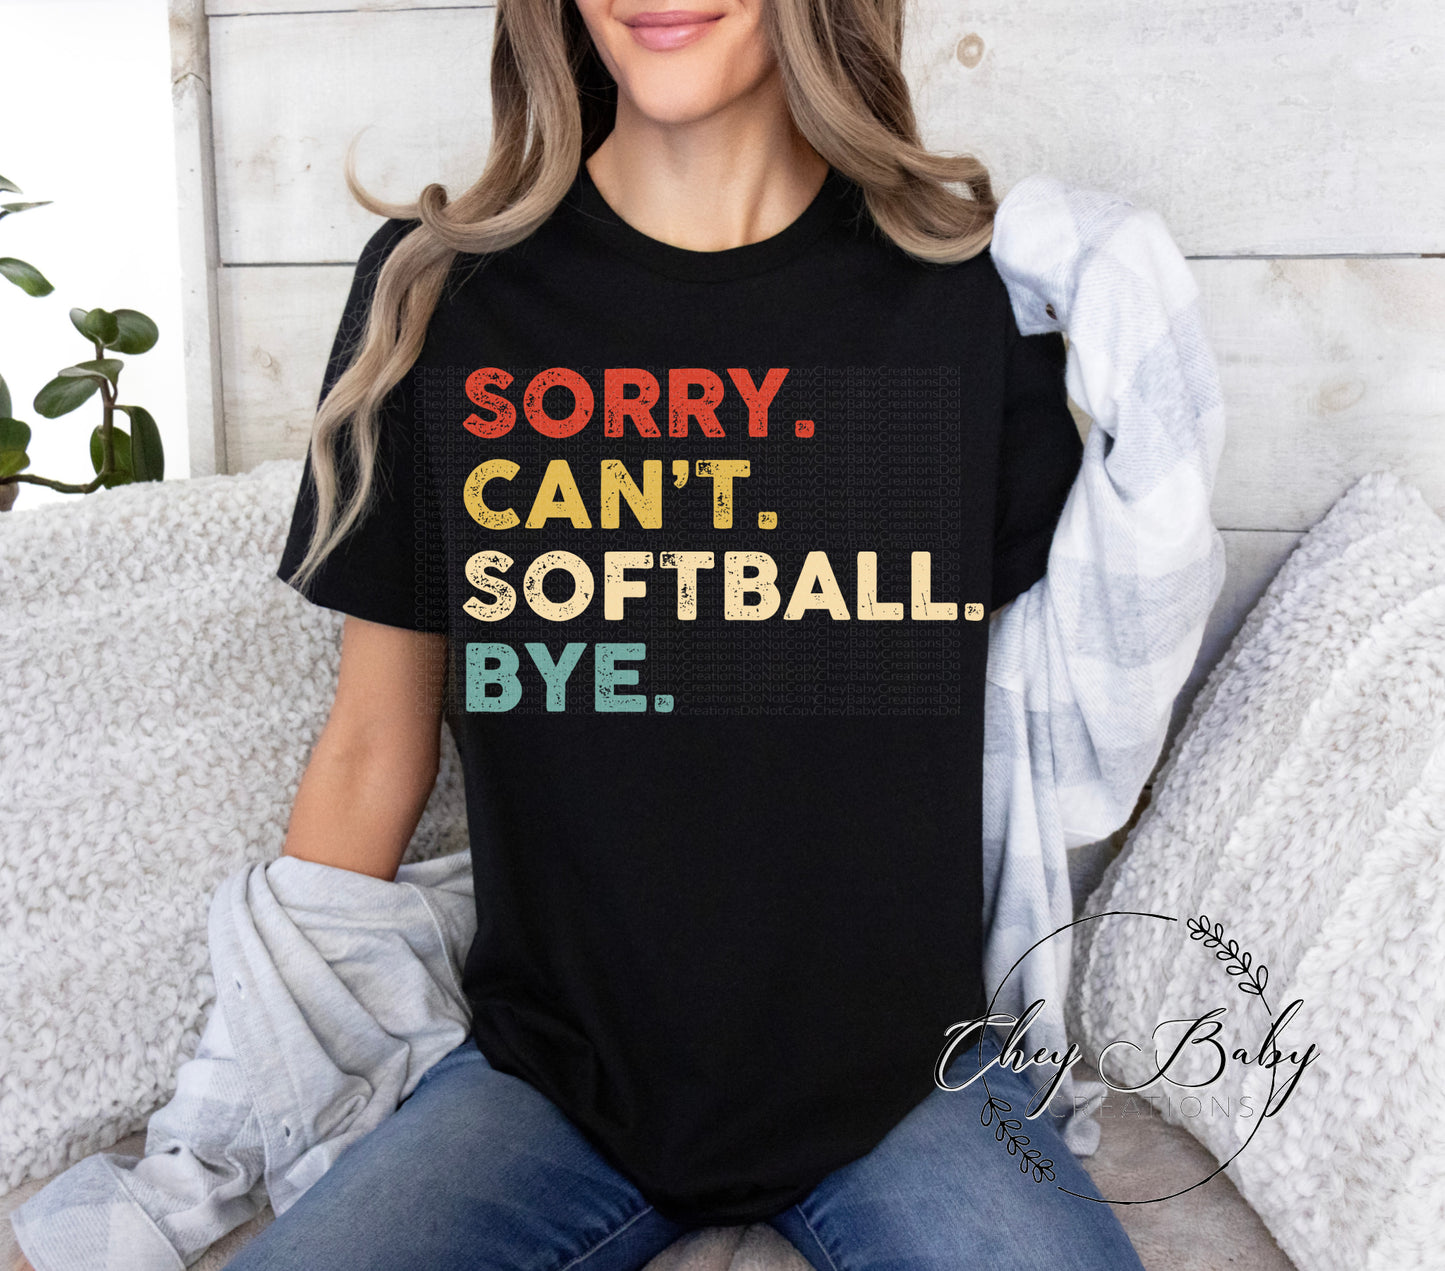 Sorry. Can't. Softball. Bye